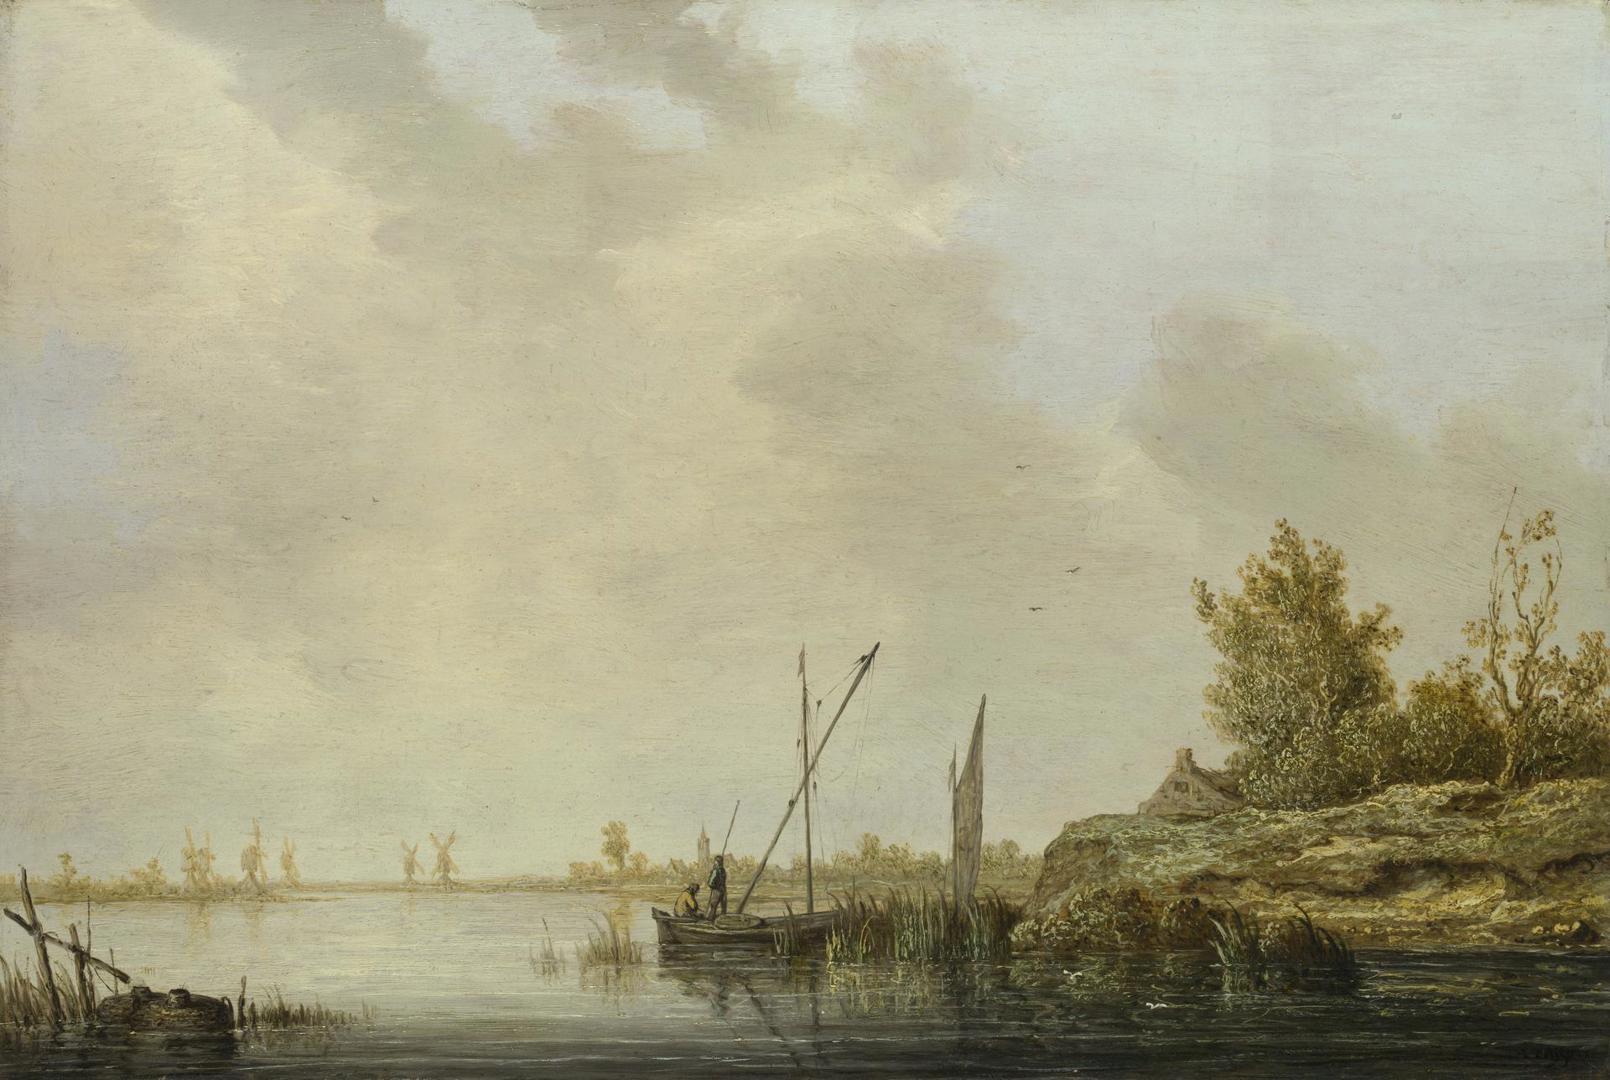 A River Scene with Distant Windmills by Aelbert Cuyp